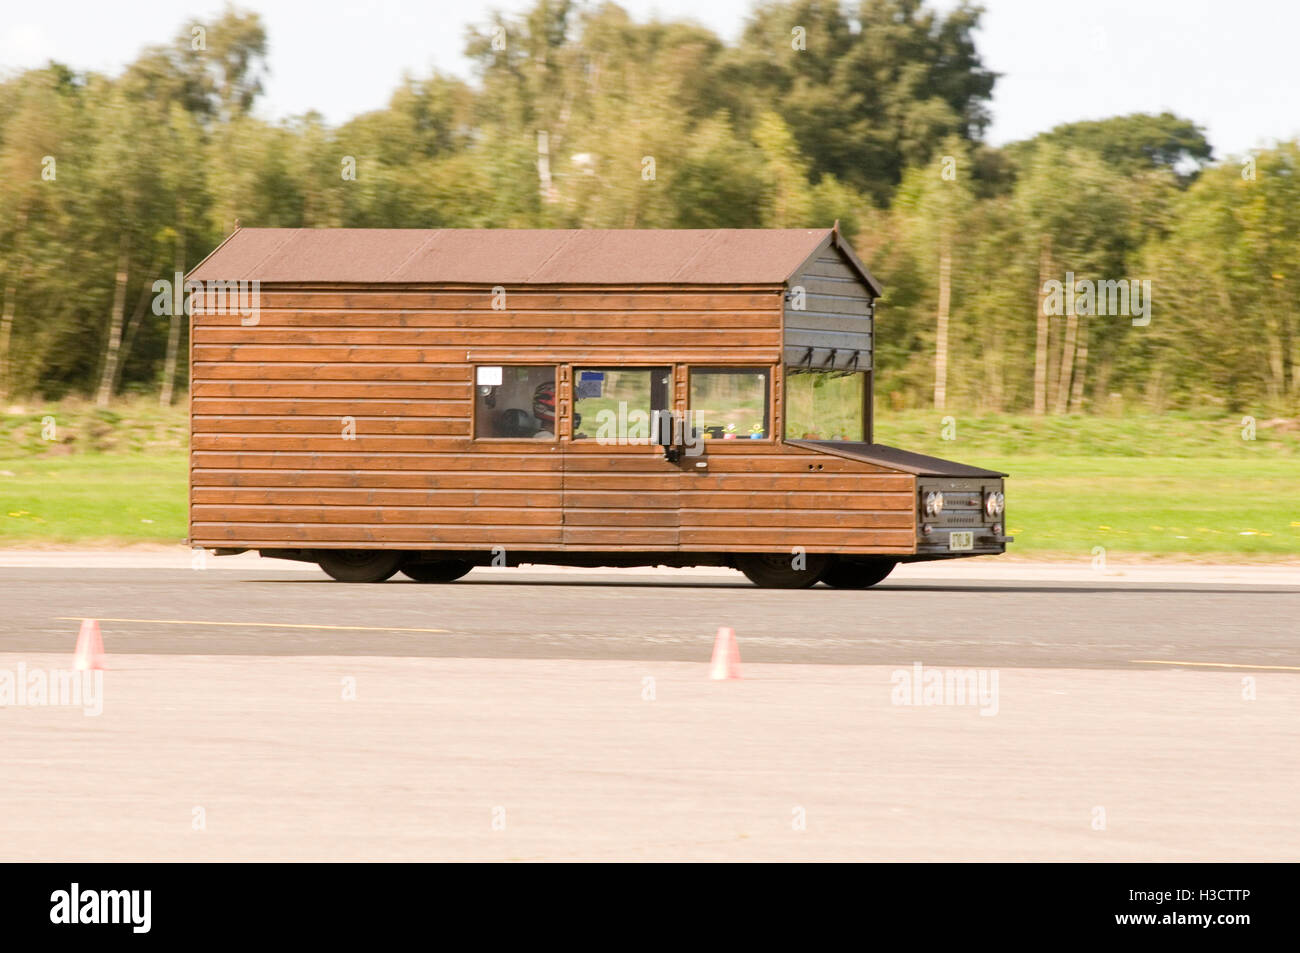 worlds fastest shed built by Kevin Nicks using a VW passat VR6 and some wood, the car is completely road legal and MOT'd Stock Photo